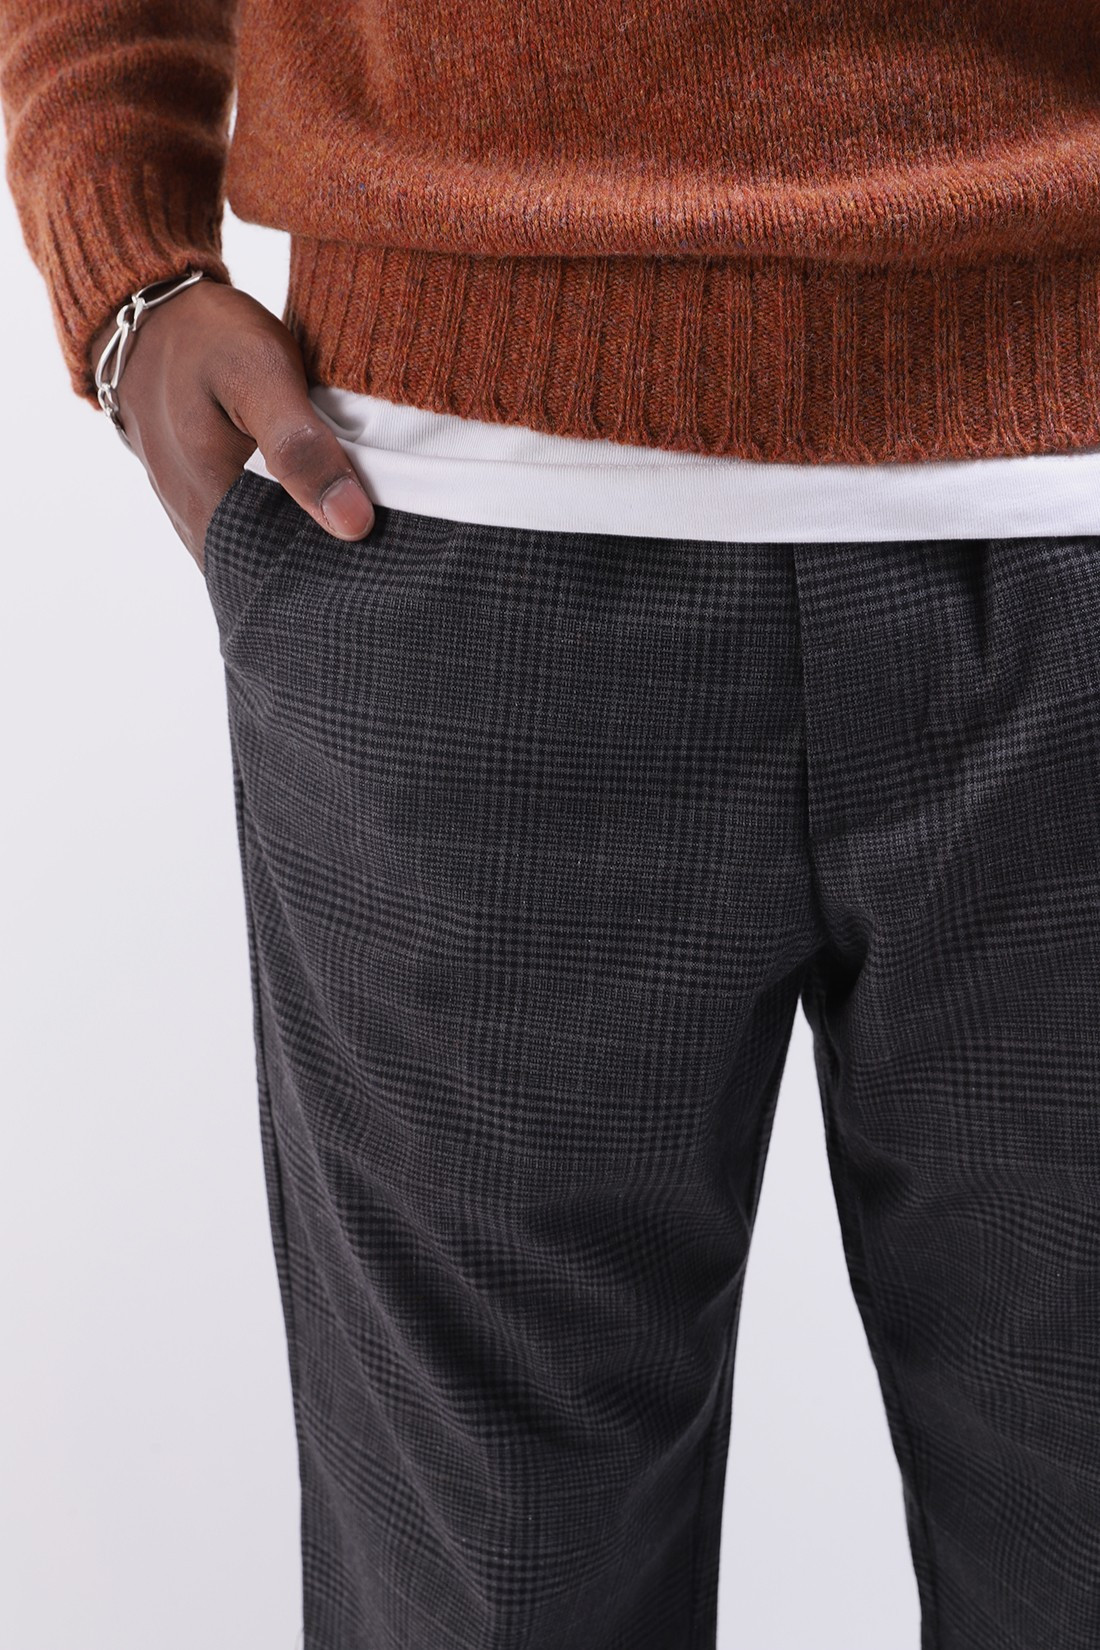 OLIVER SPENCER / Drawstrings trousers dowling Charcoal